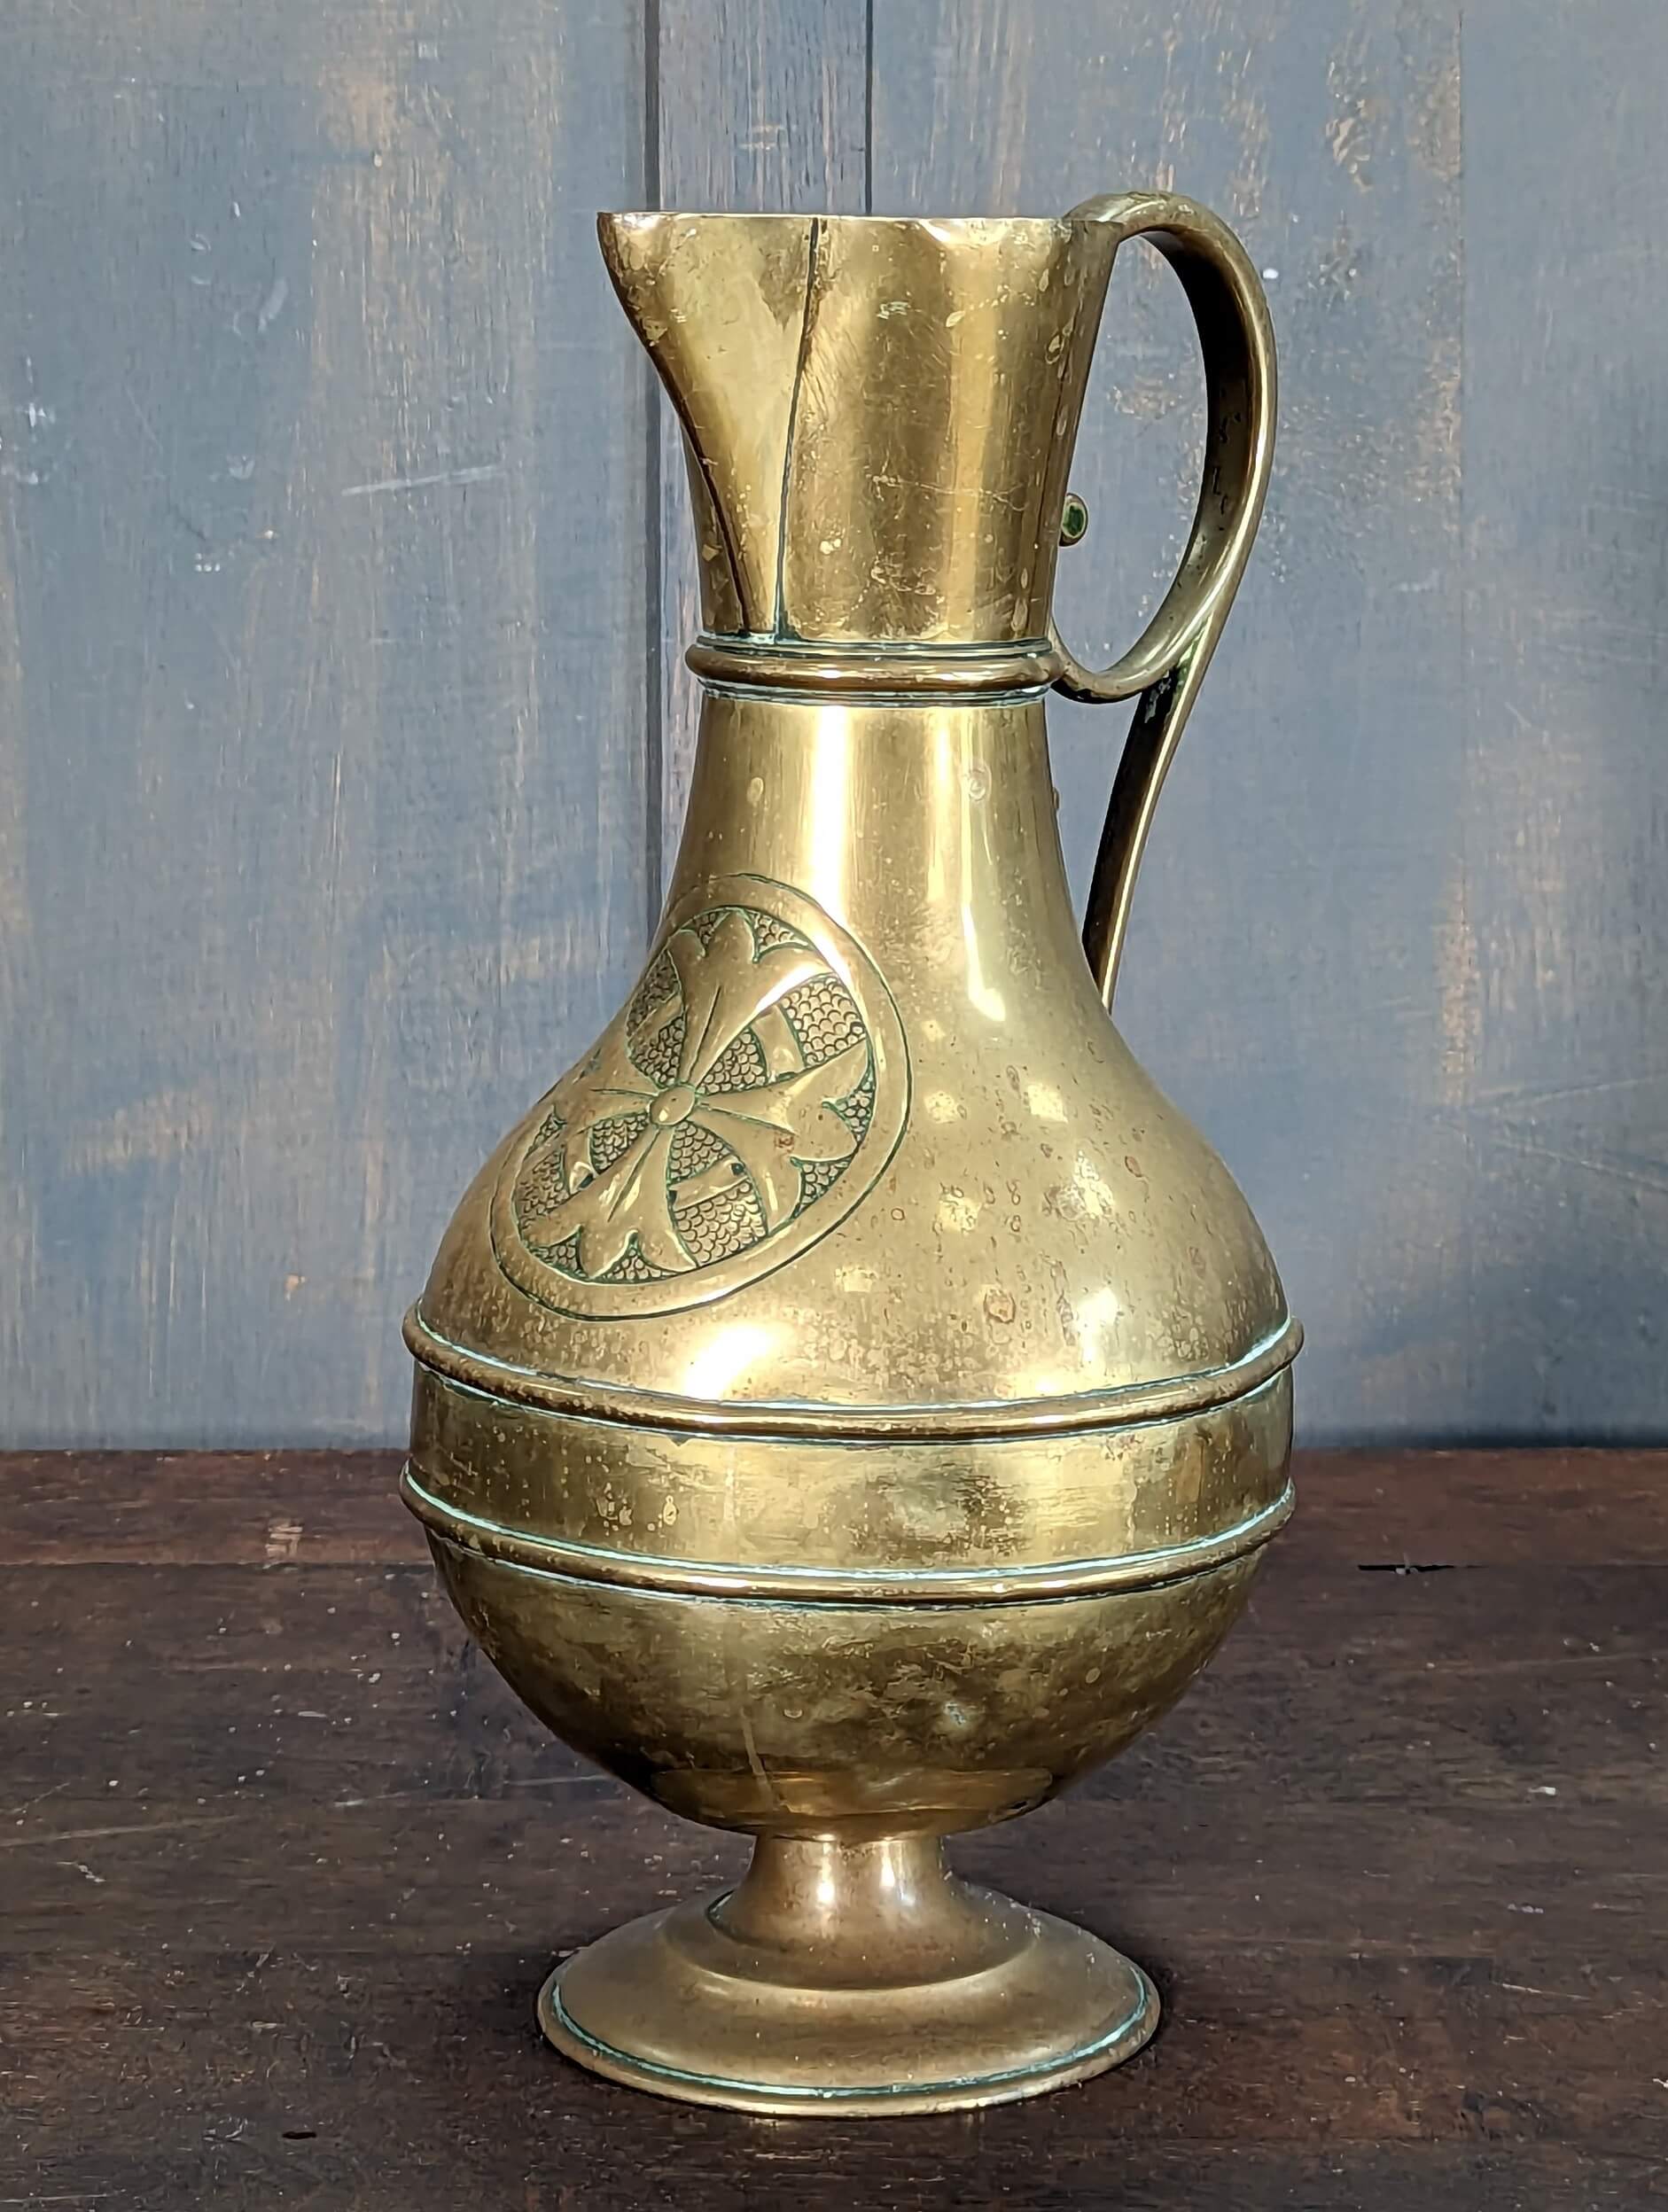 Antique Victorian Brass Church Baptismal Ewer Jug with Embossed